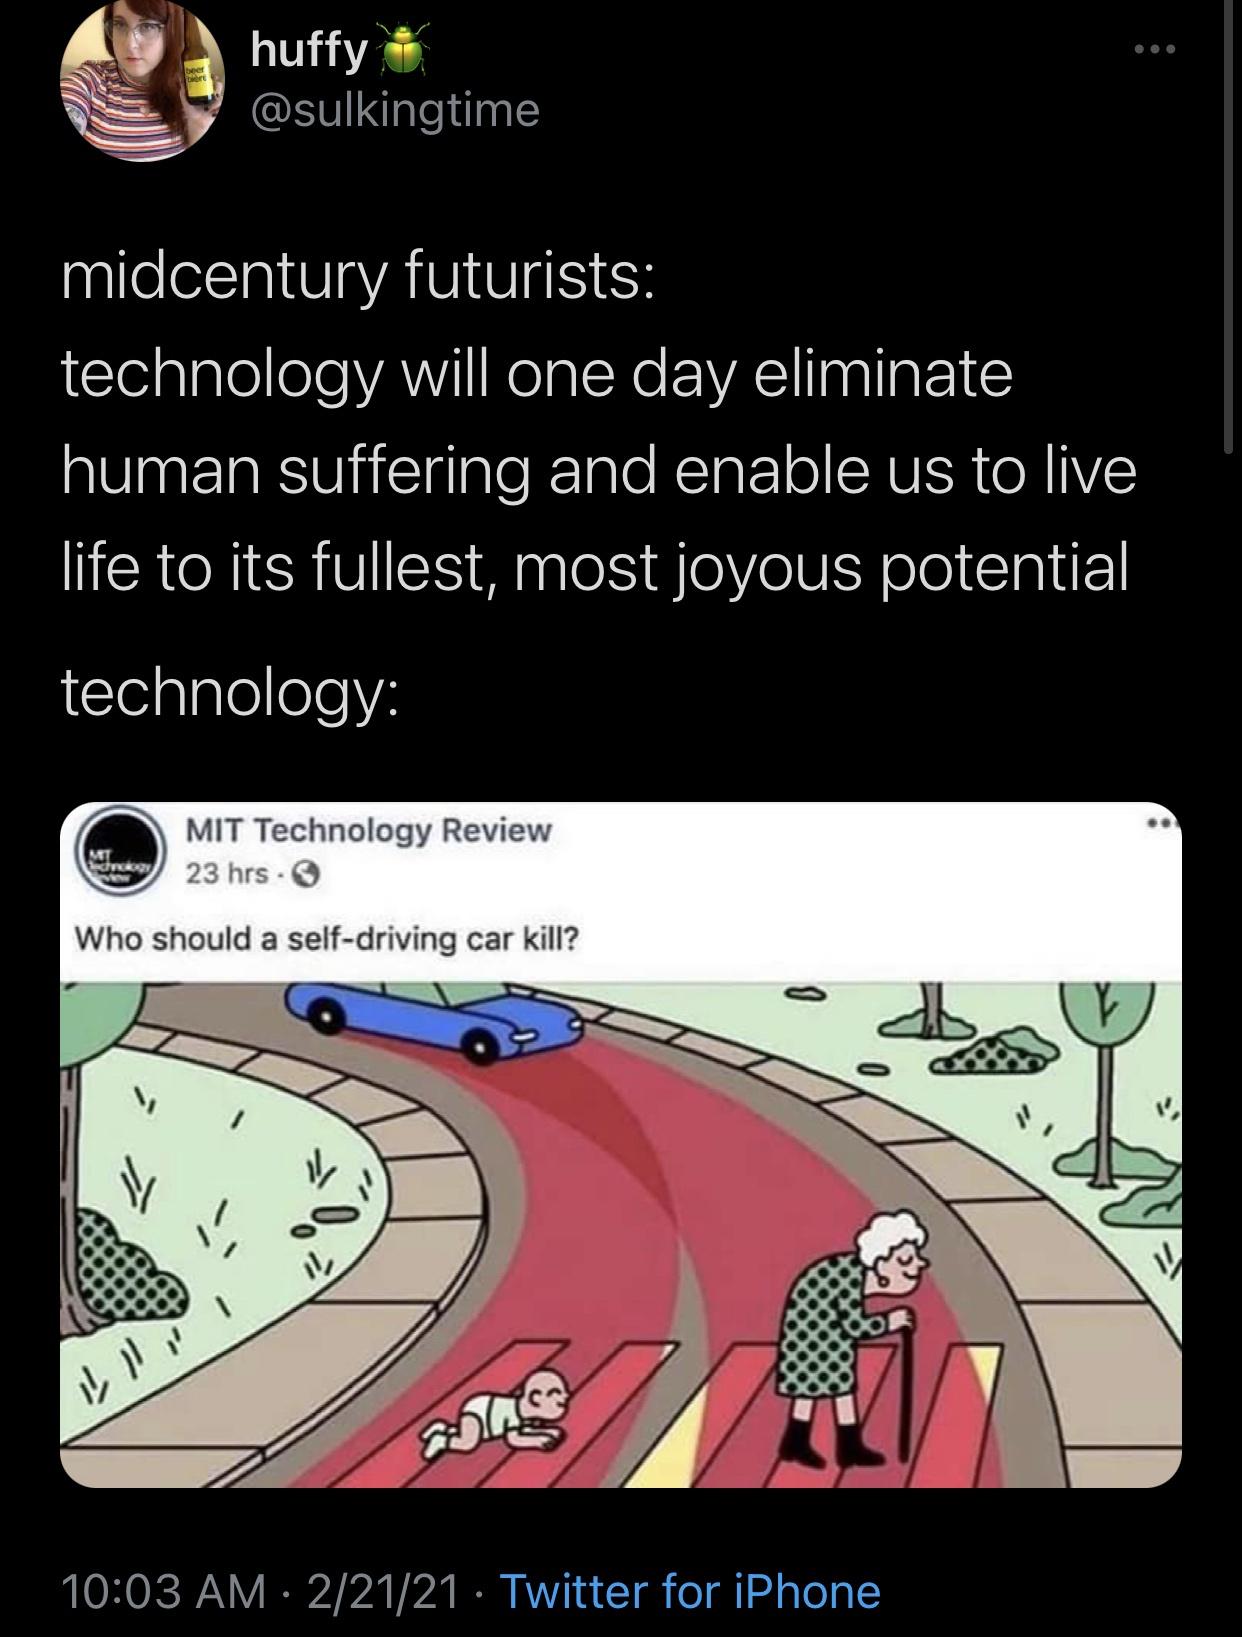 cartoon - Te huffy midcentury futurists technology will one day eliminate human suffering and enable us to live life to its fullest, most joyous potential technology Mt nuky Mit Technology Review 23 hrs Who should a selfdriving car kill? 22121 Twitter for